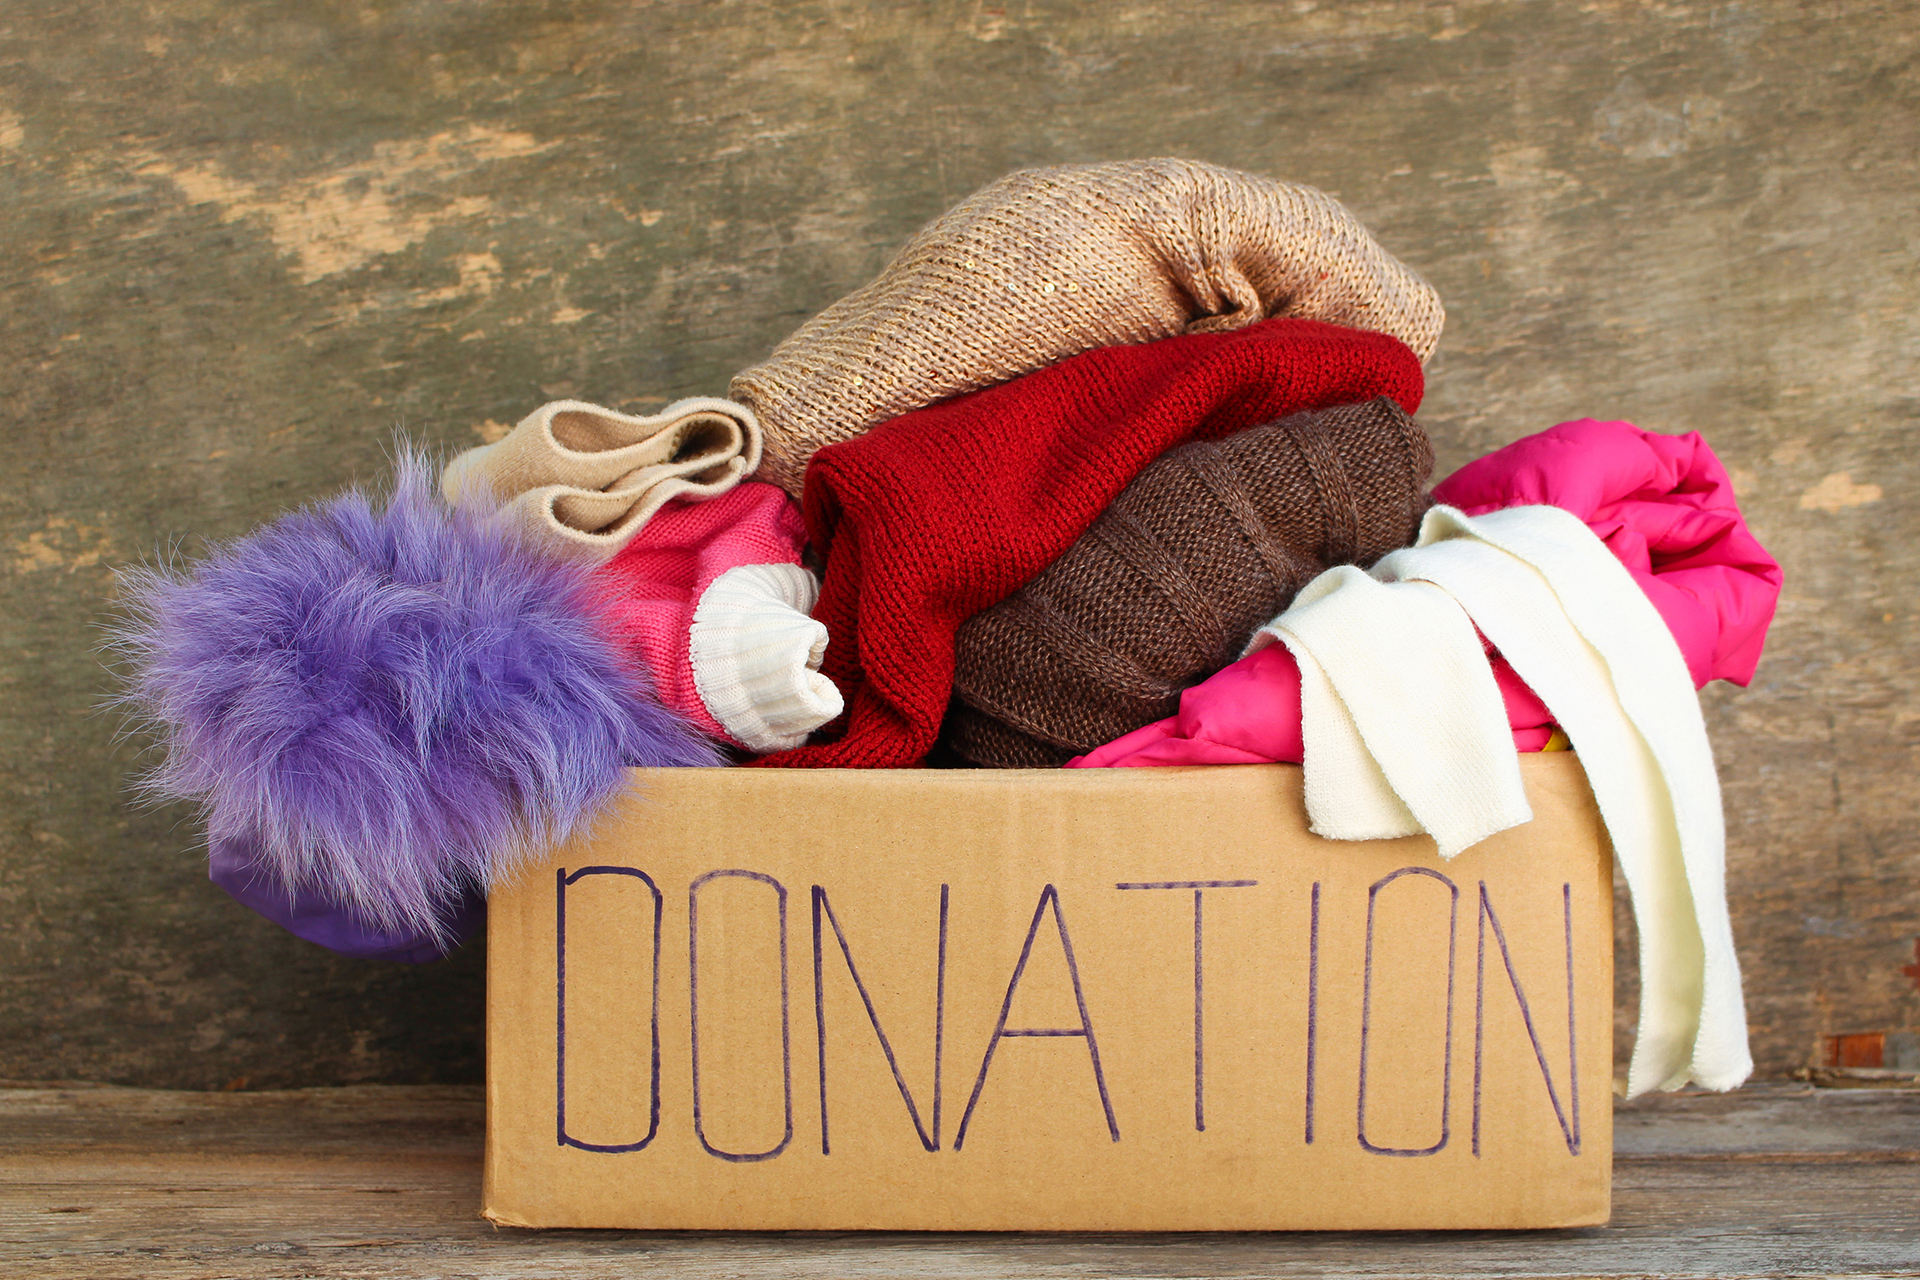 Image of a donation box with cold weather clothing inside